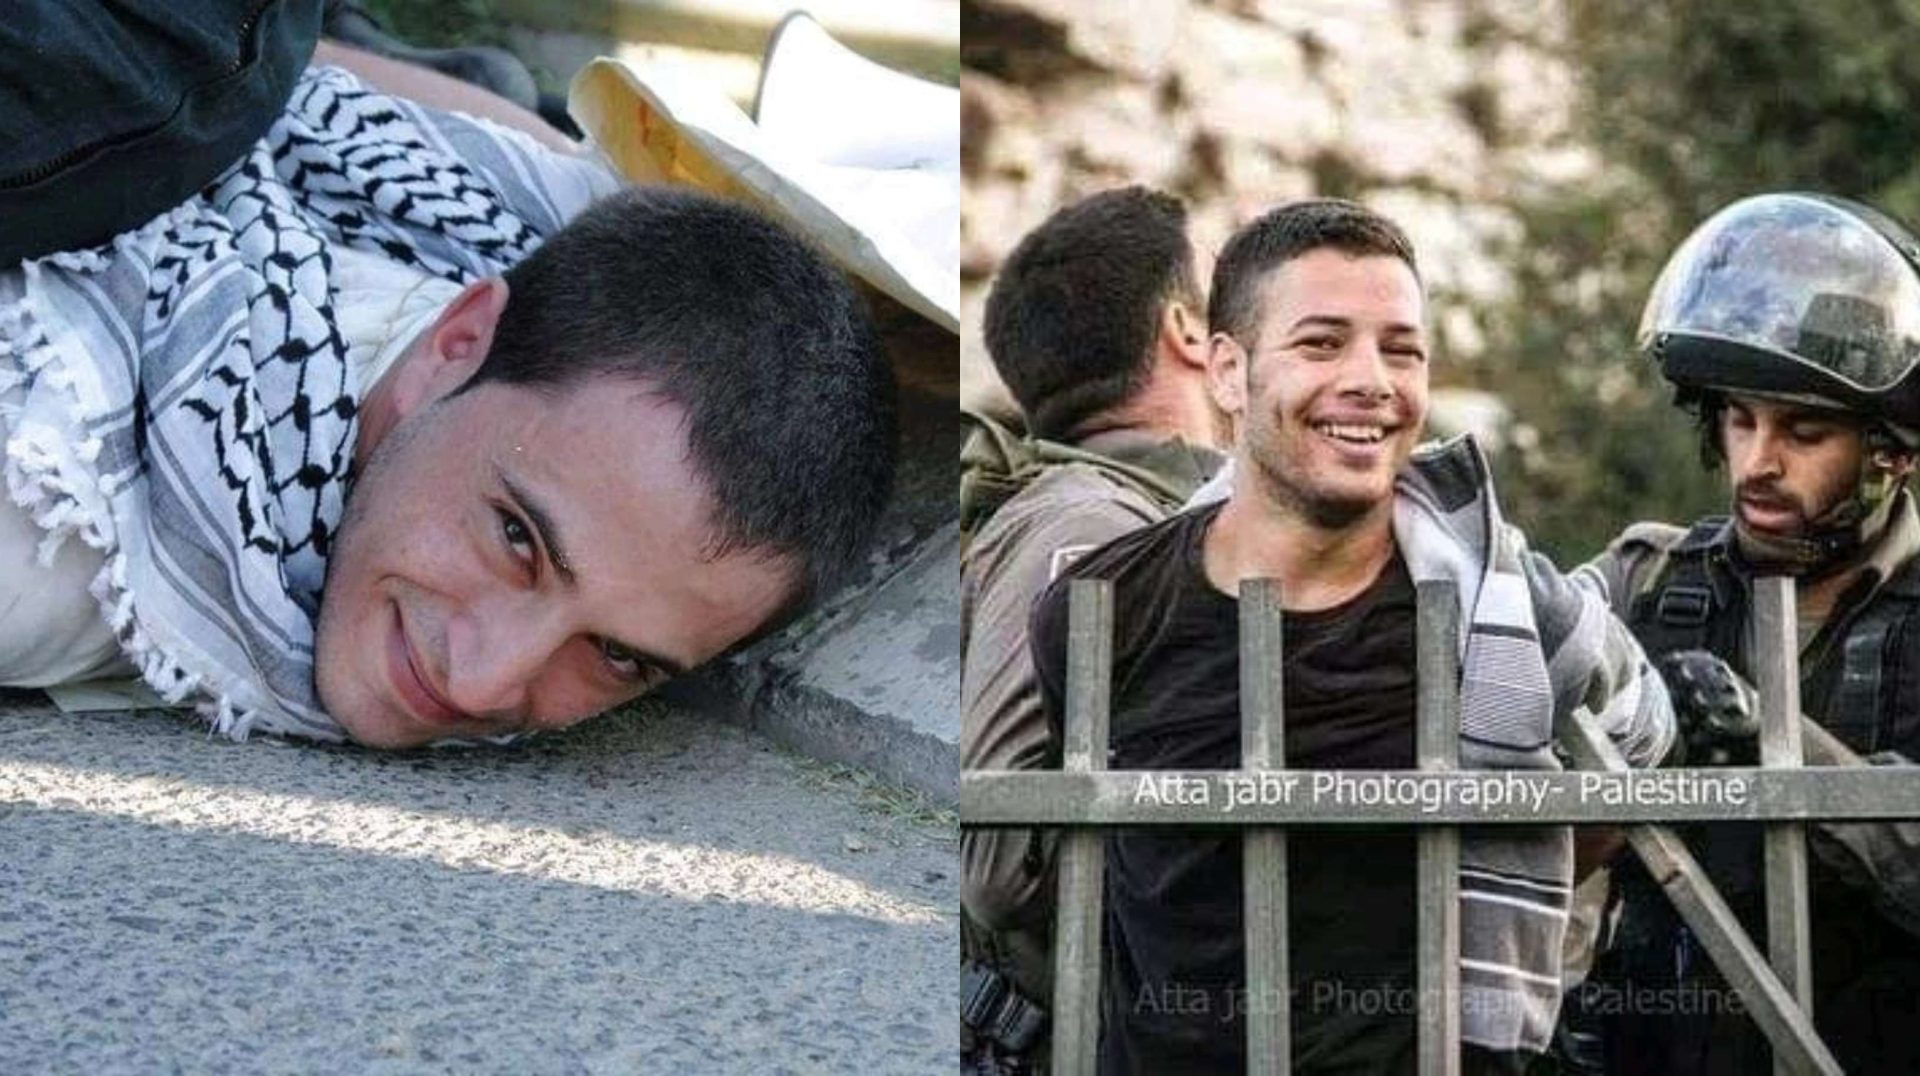 Heart Warming Pictures Of Palestinians Smiling While Getting Arrested